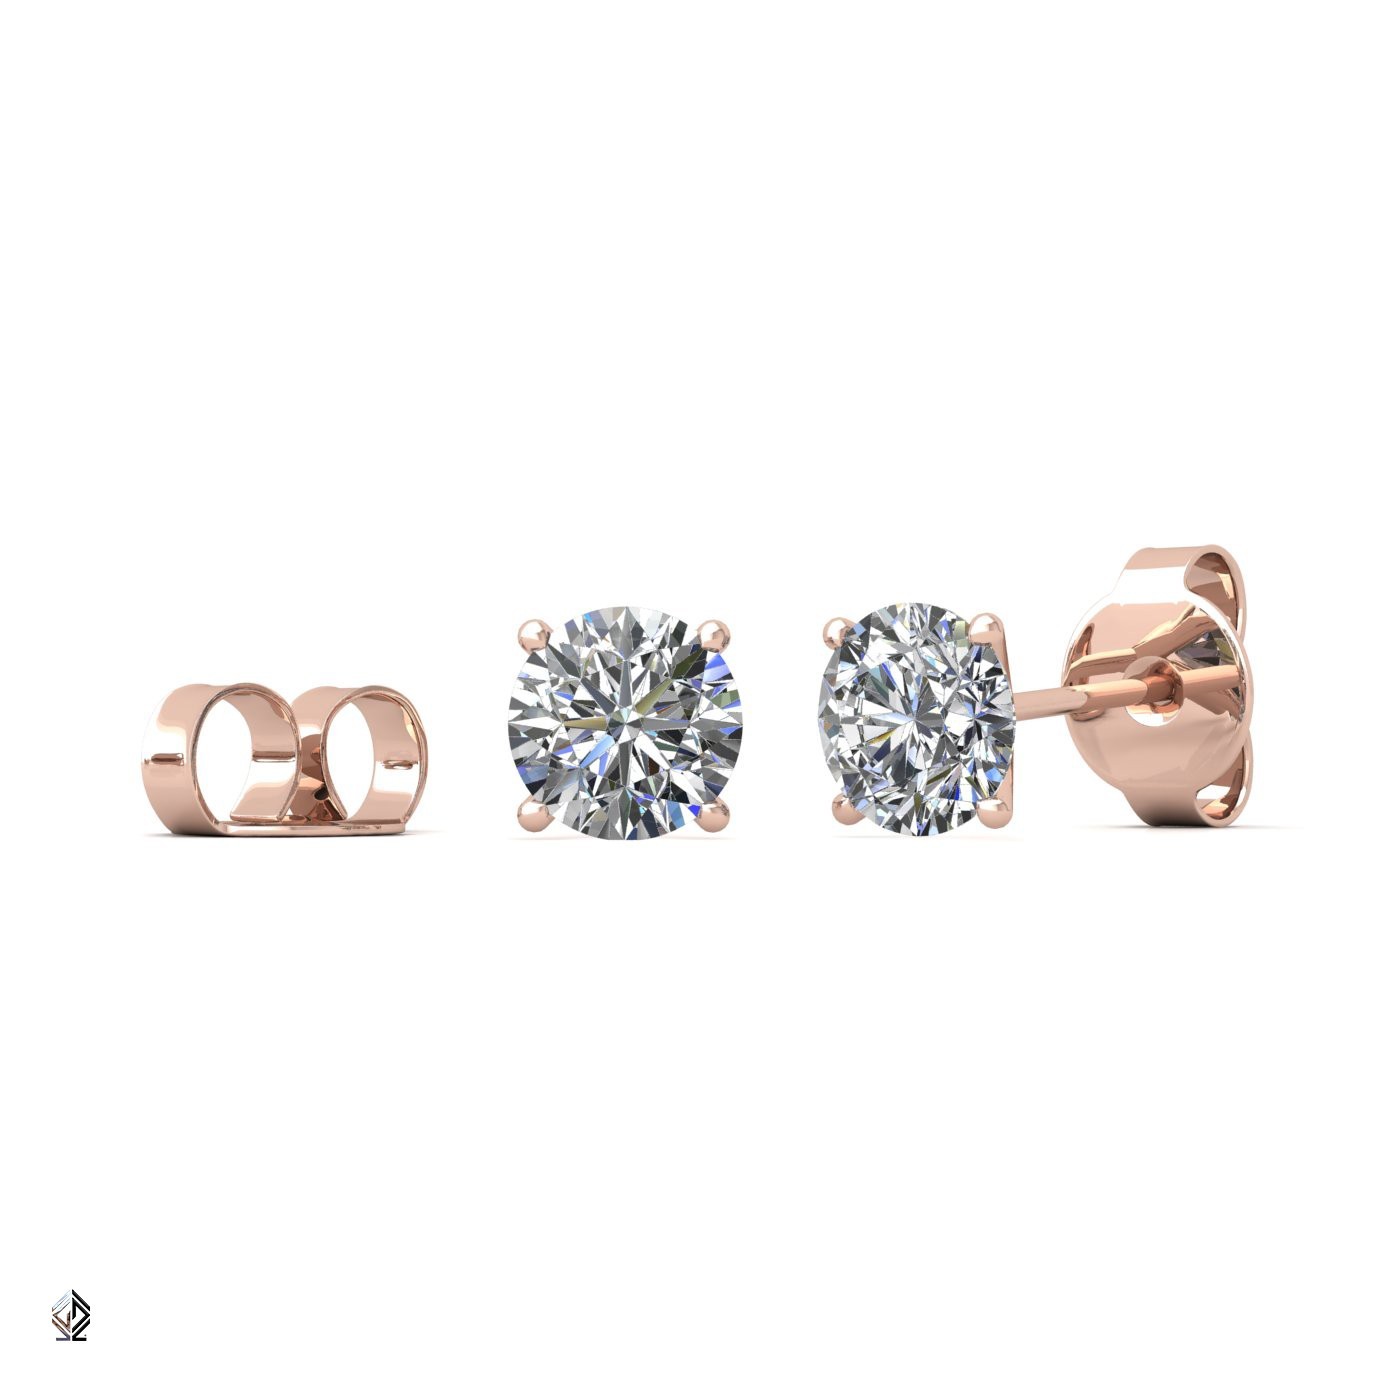 18k rose gold 1.0 ct each (2,0 tcw) 4 prongs round cut classic diamond earring studs Photos & images